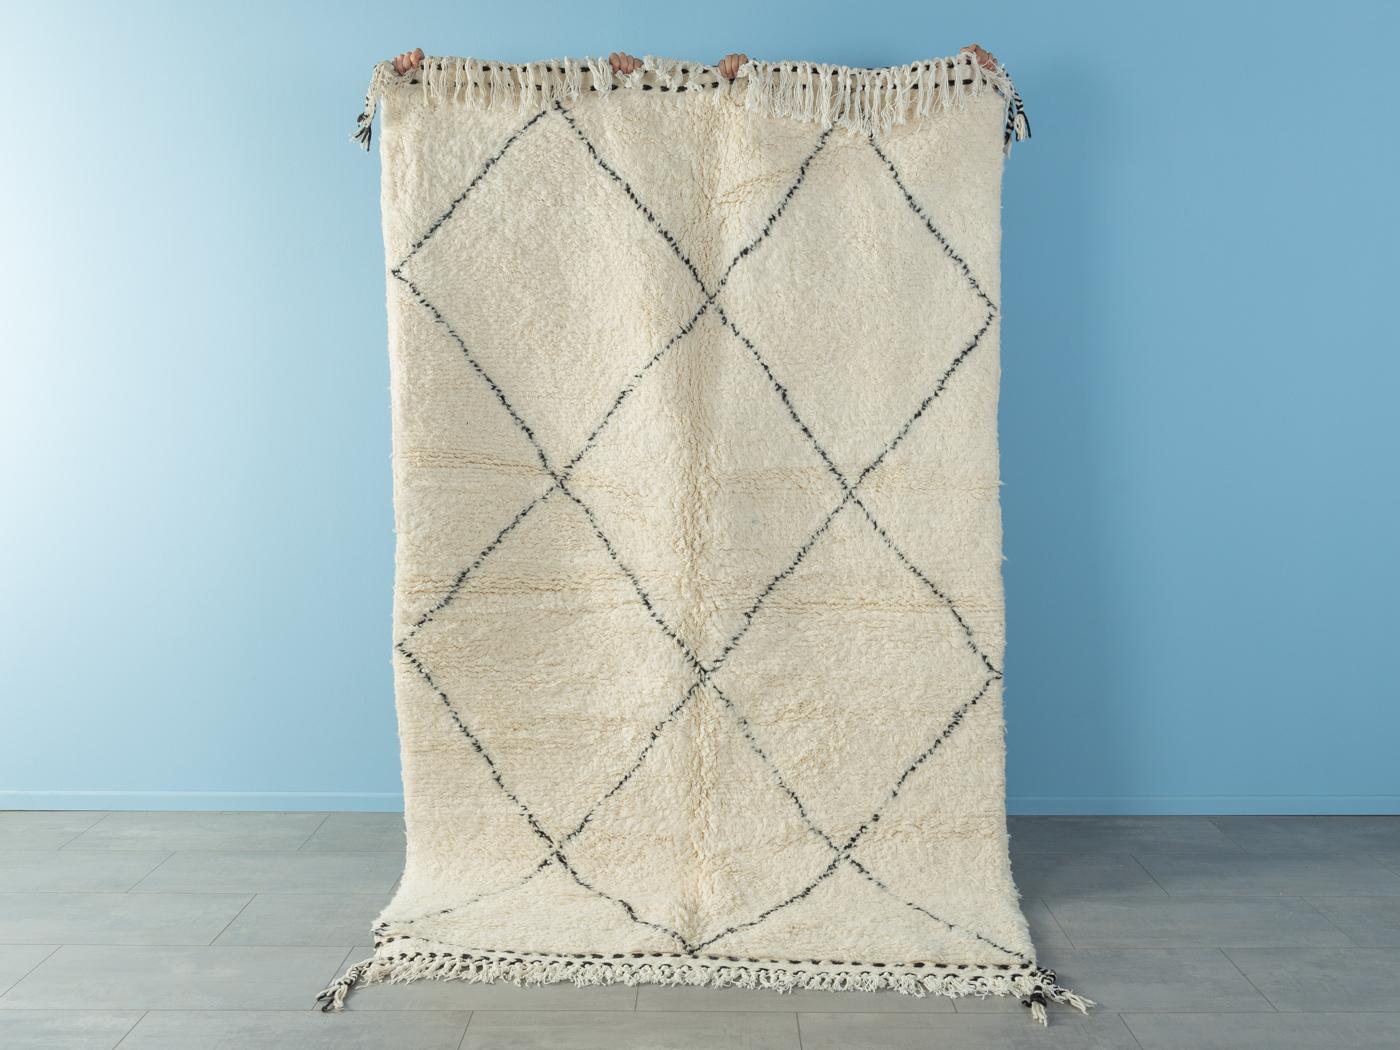 Midi Beni III is a contemporary 100% wool rug – thick and soft, comfortable underfoot. Our Berber rugs are handwoven and handknotted by Amazigh women in the Atlas Mountains. These communities have been crafting rugs for thousands of years. One knot